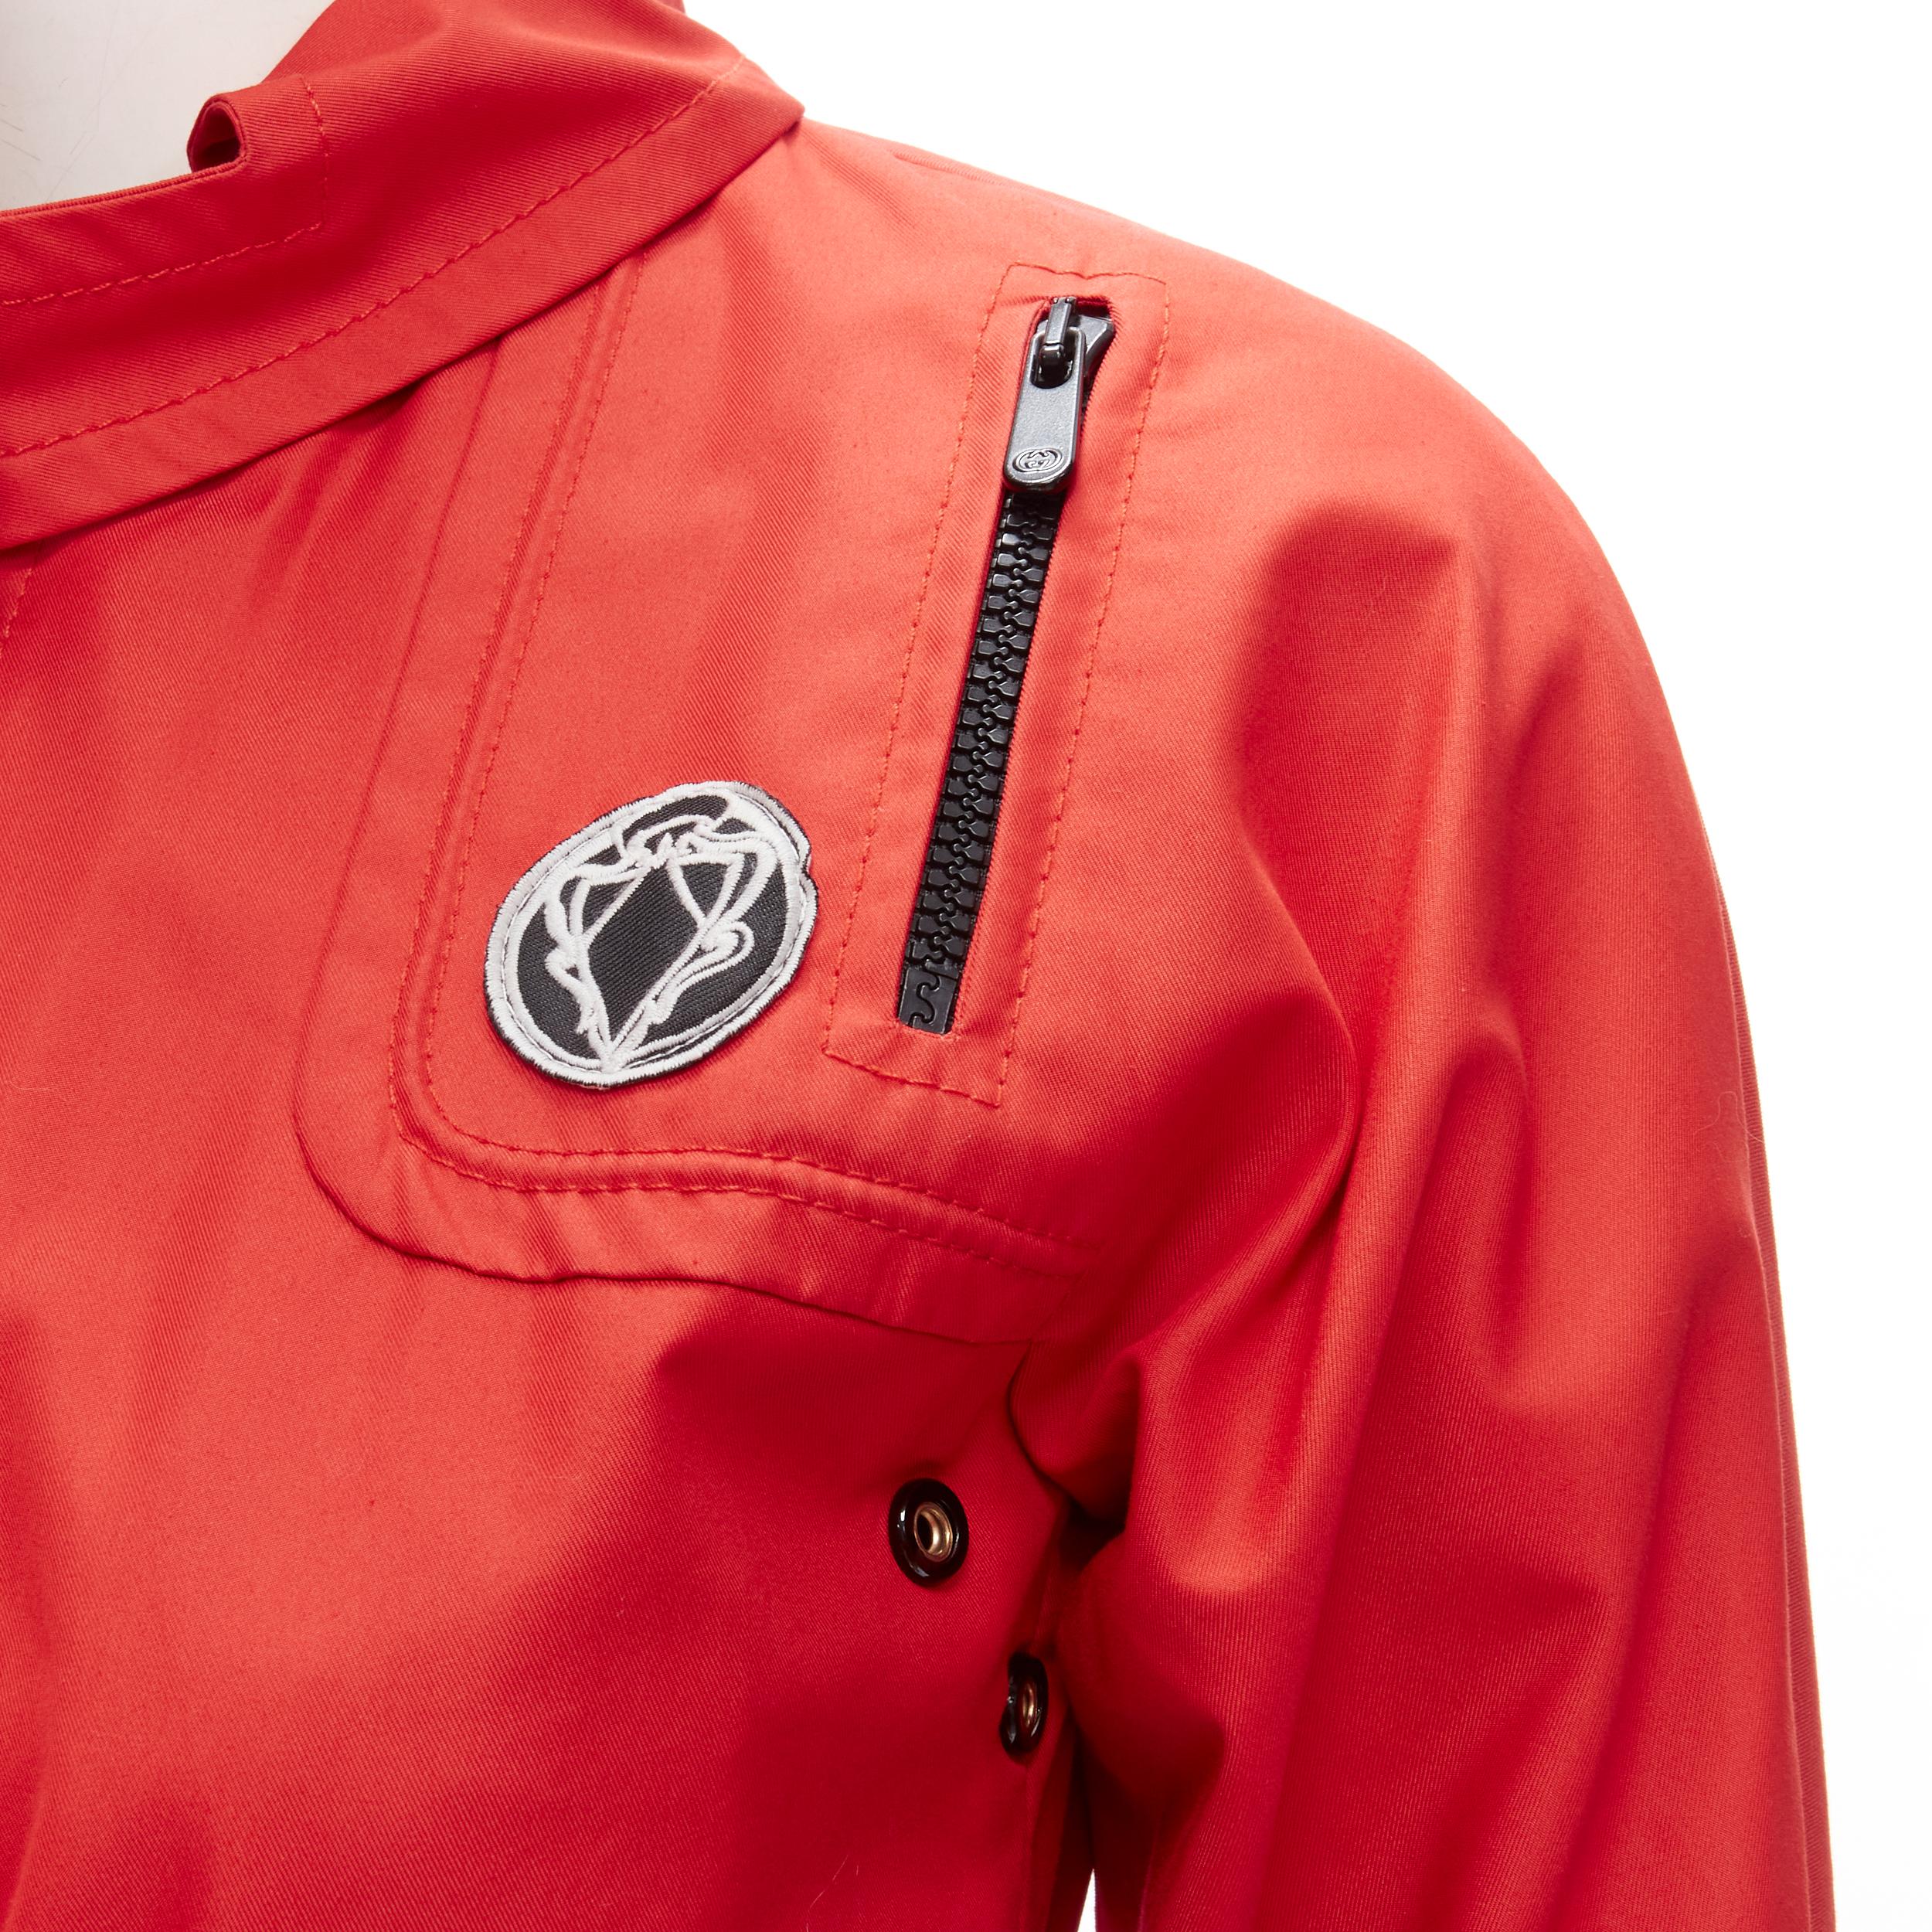 GUCCI red cotton elasticised waist belted anorak parka jacket IT36 S
Brand: Gucci
Material: Feels like cotton
Color: Red
Pattern: Solid
Closure: Zip
Extra Detail: Gucci Vintage Crest badge at chest. GG logo black zipper pull. Elasticised waist with